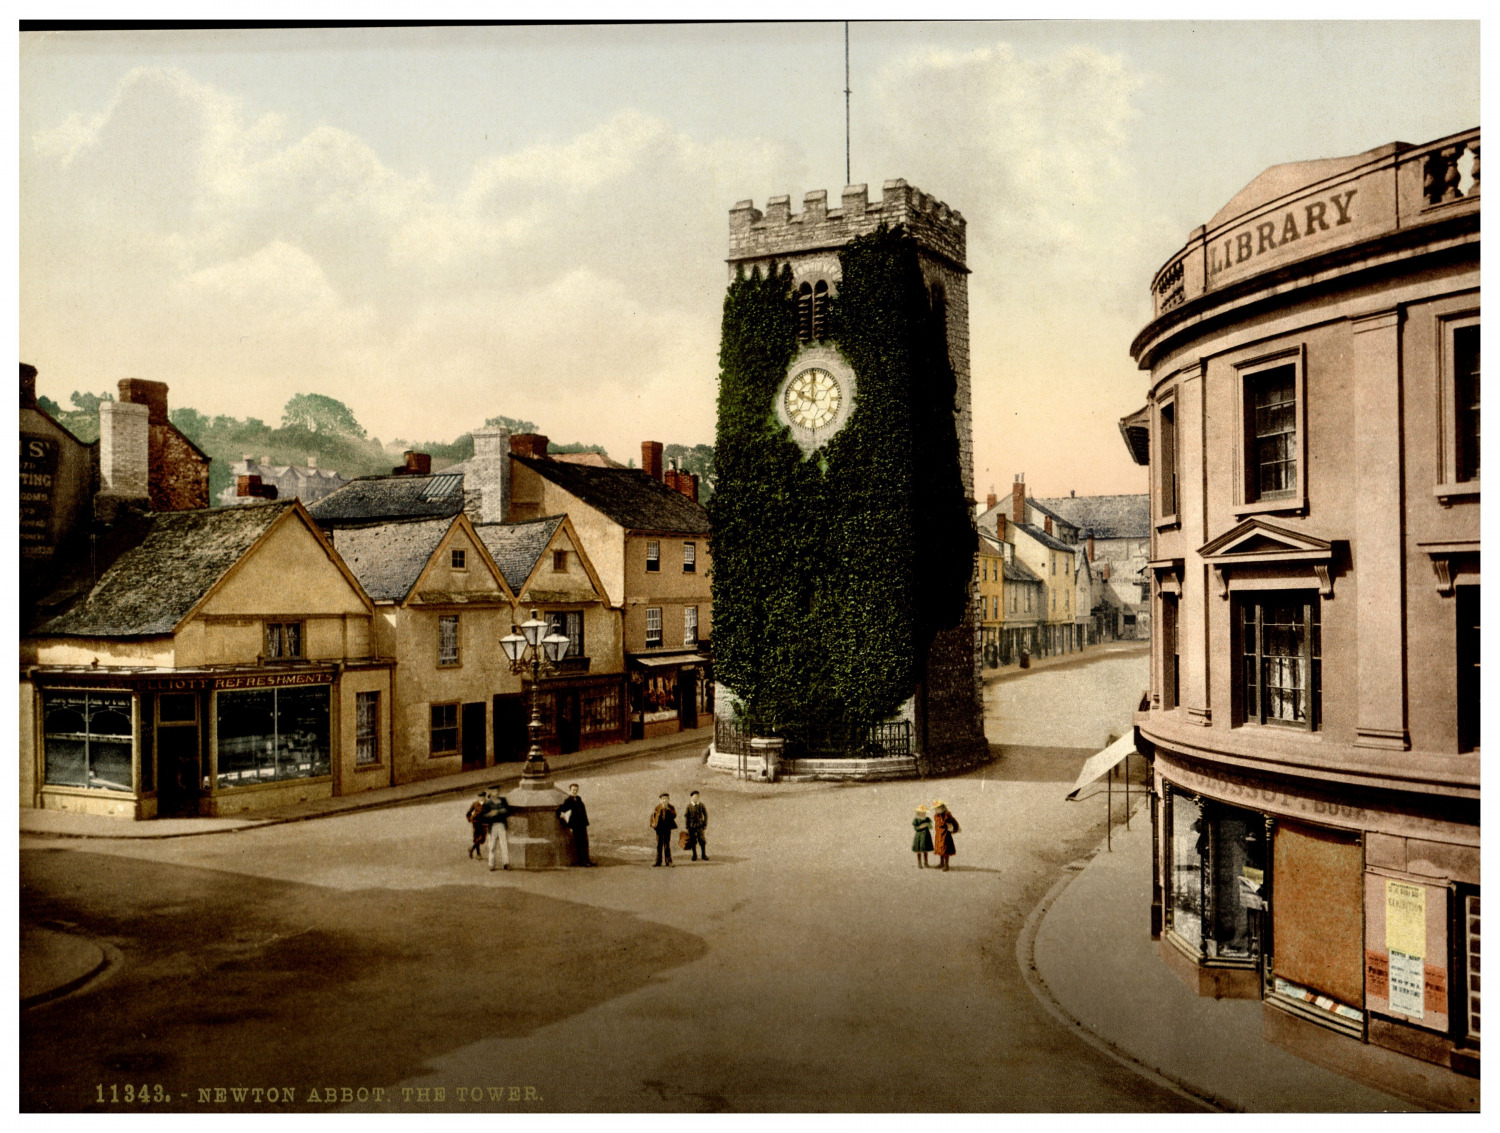 England. Newton Abbot. The Tower. Vintage Photochrome by P.Z, Photochrome Zurich